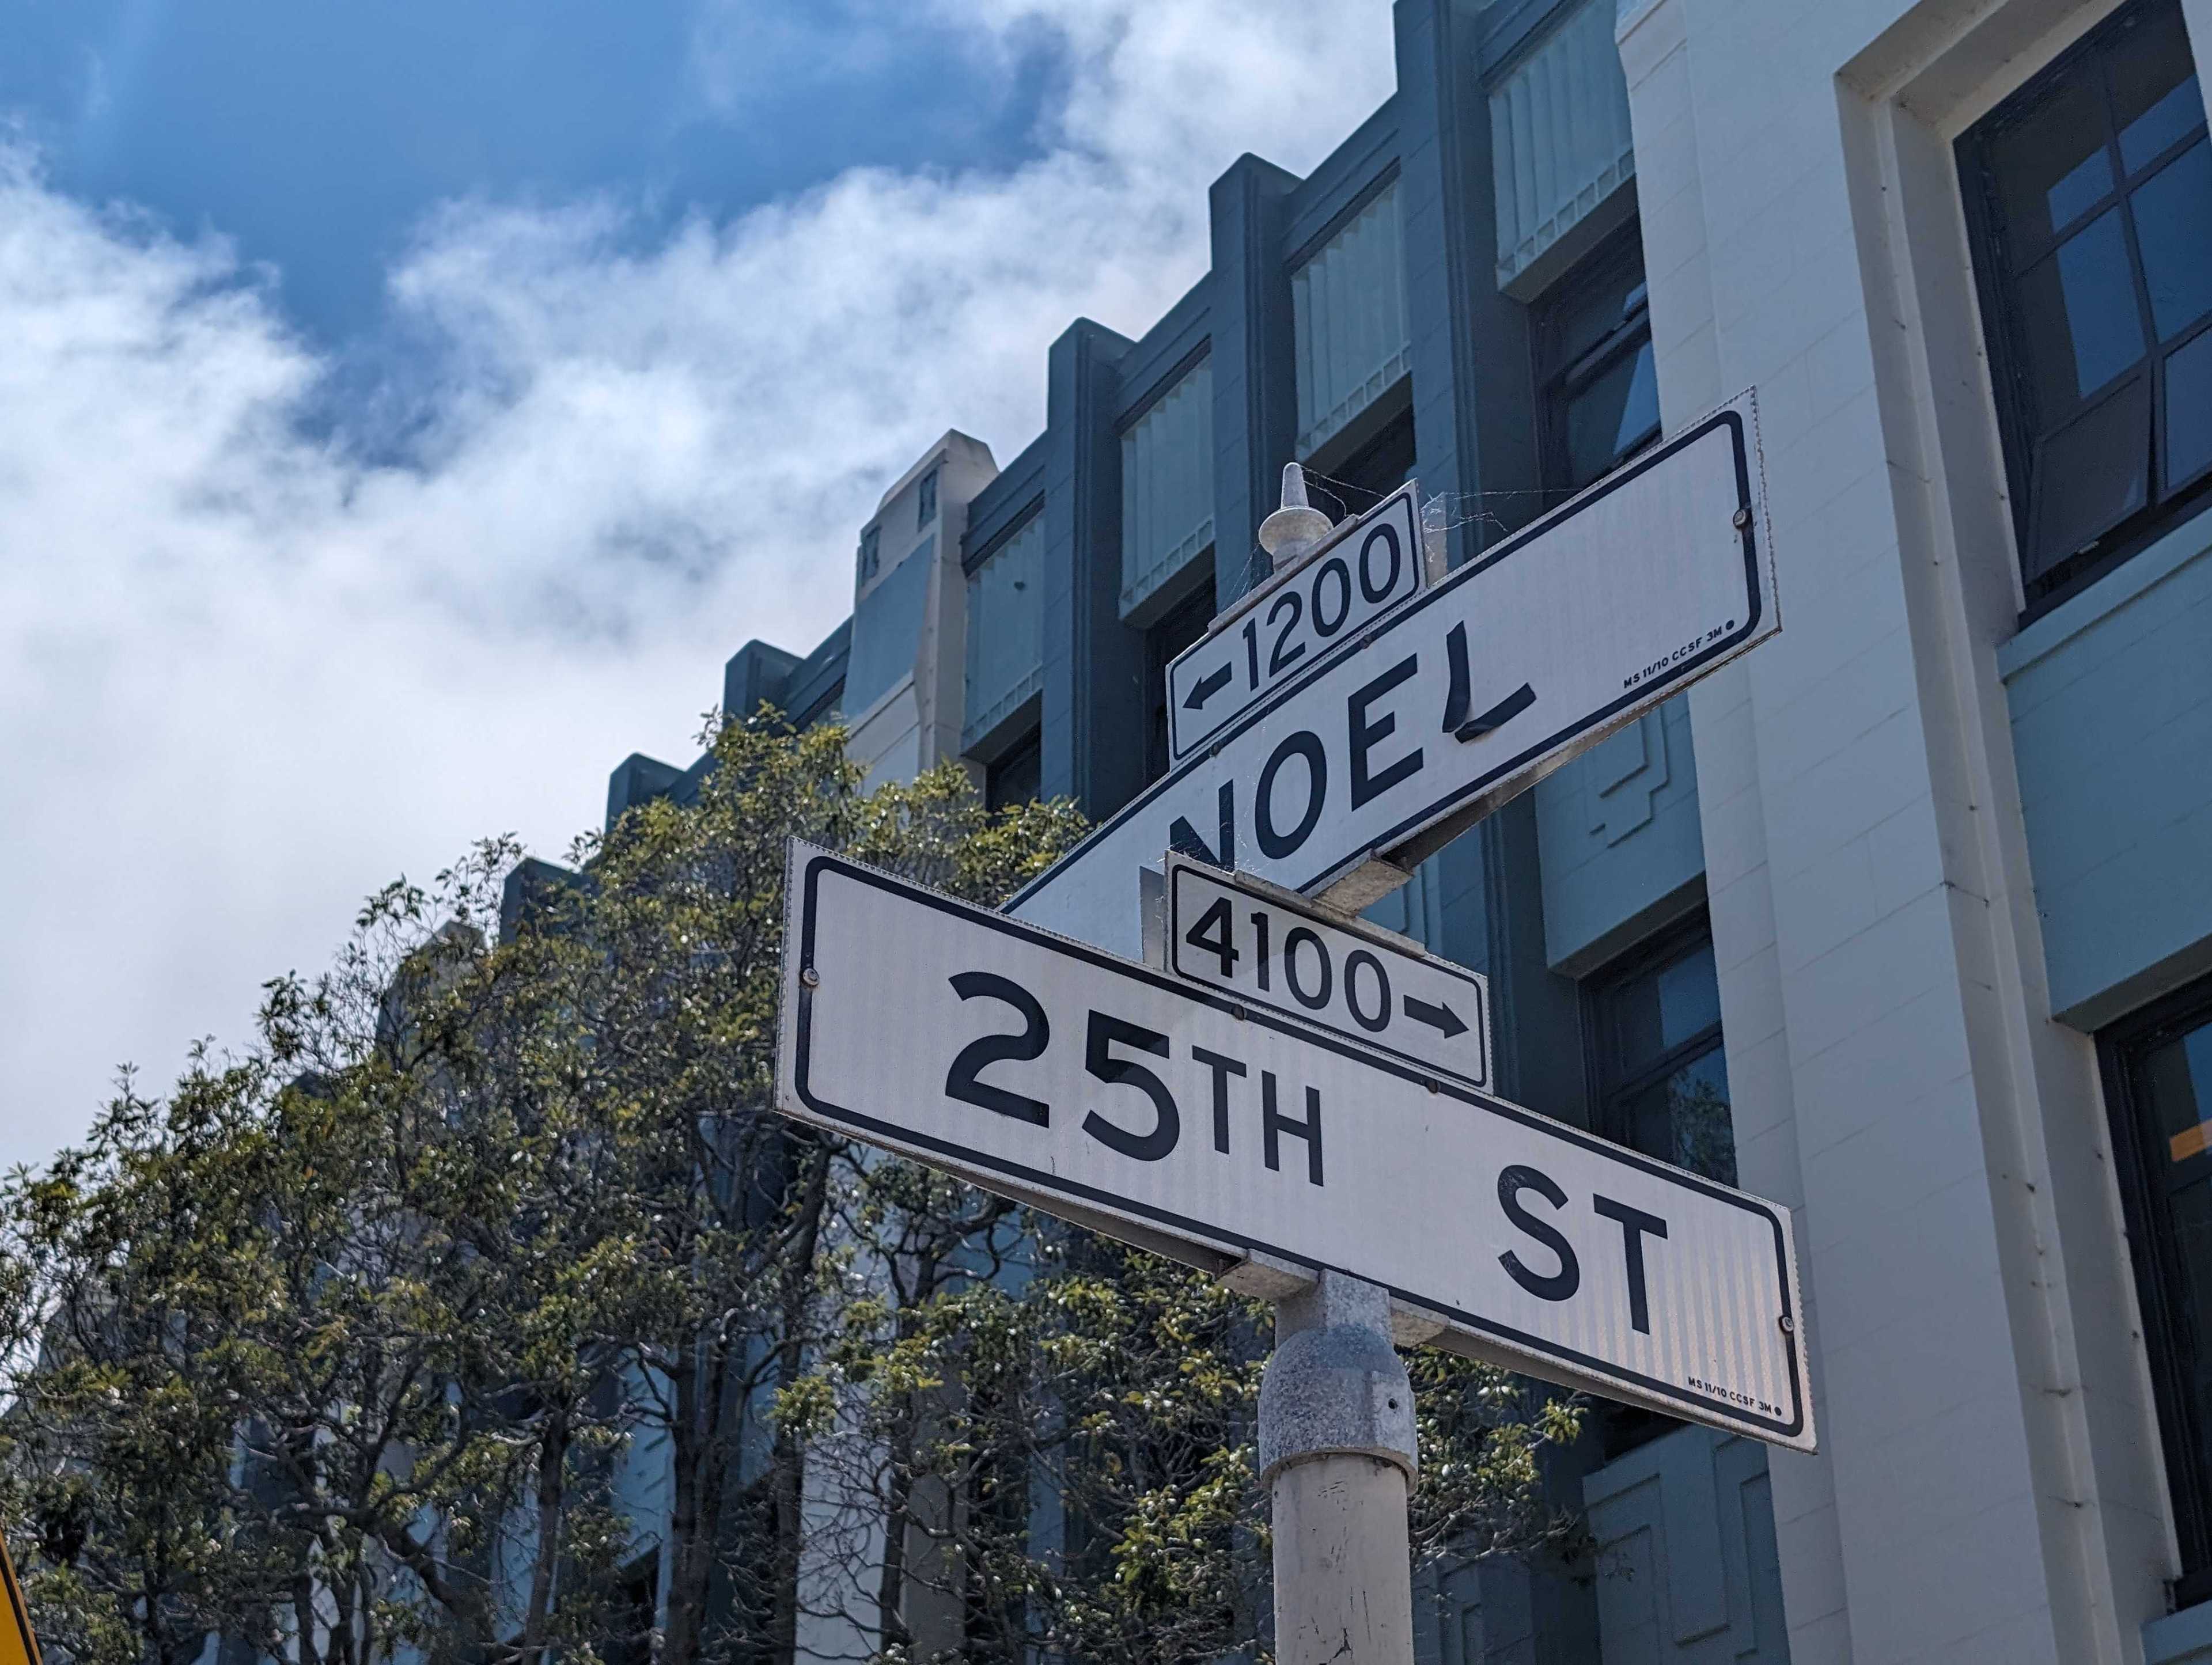 Street signs for "NOEL" and "25TH ST" are mounted on a post in front of a modern building with trees and a blue sky.